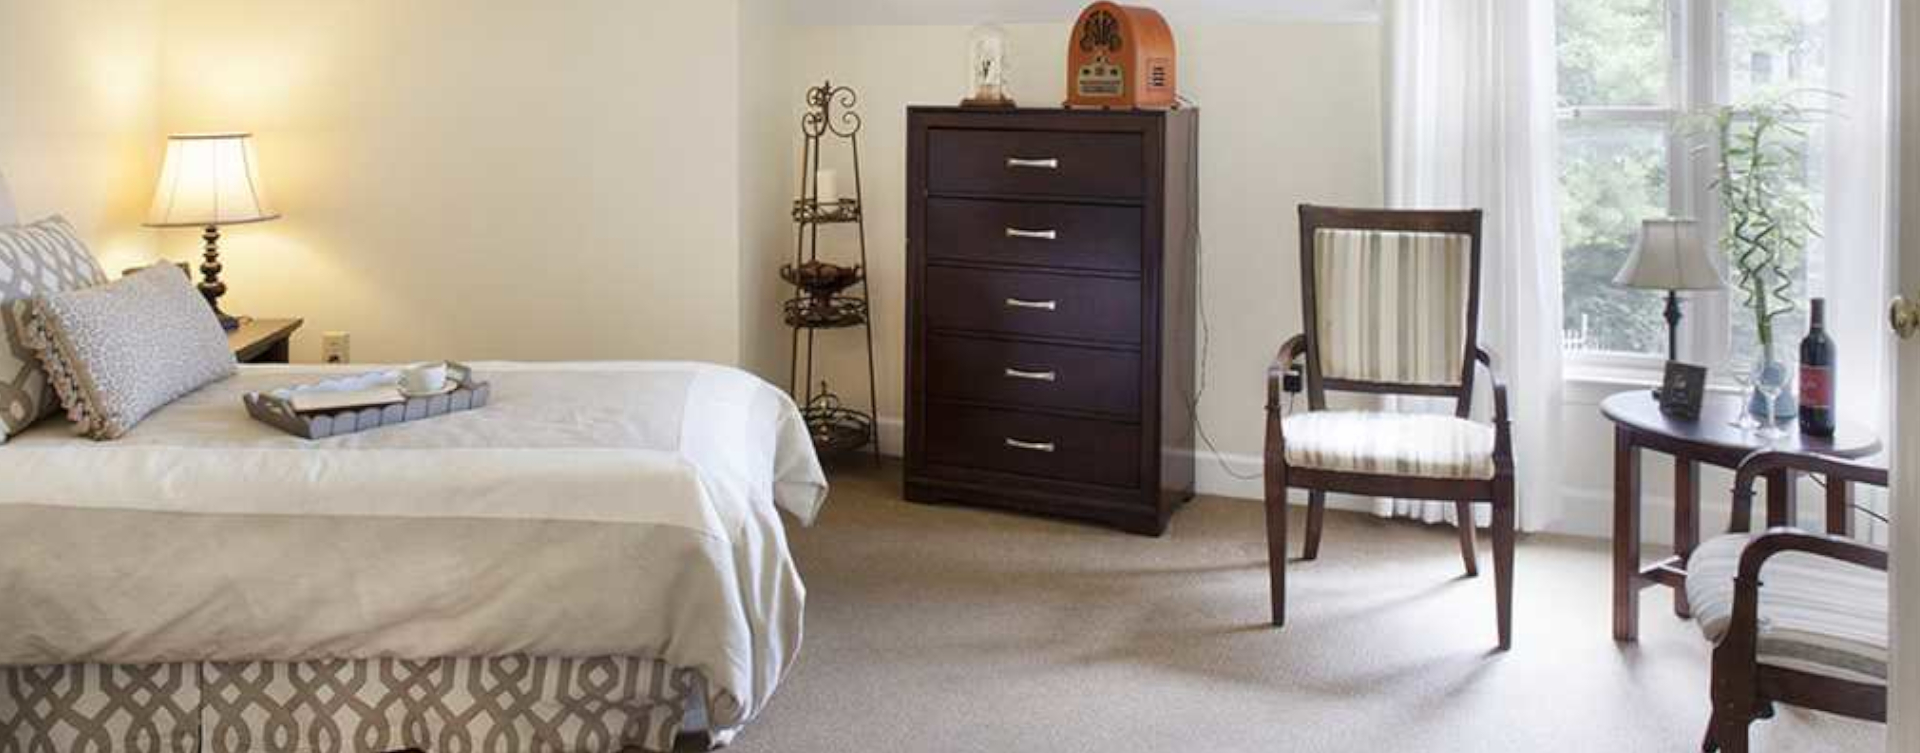 Enjoy senior friendly amenities, personal climate control and security in an apartment at Bickford of Upper Arlington